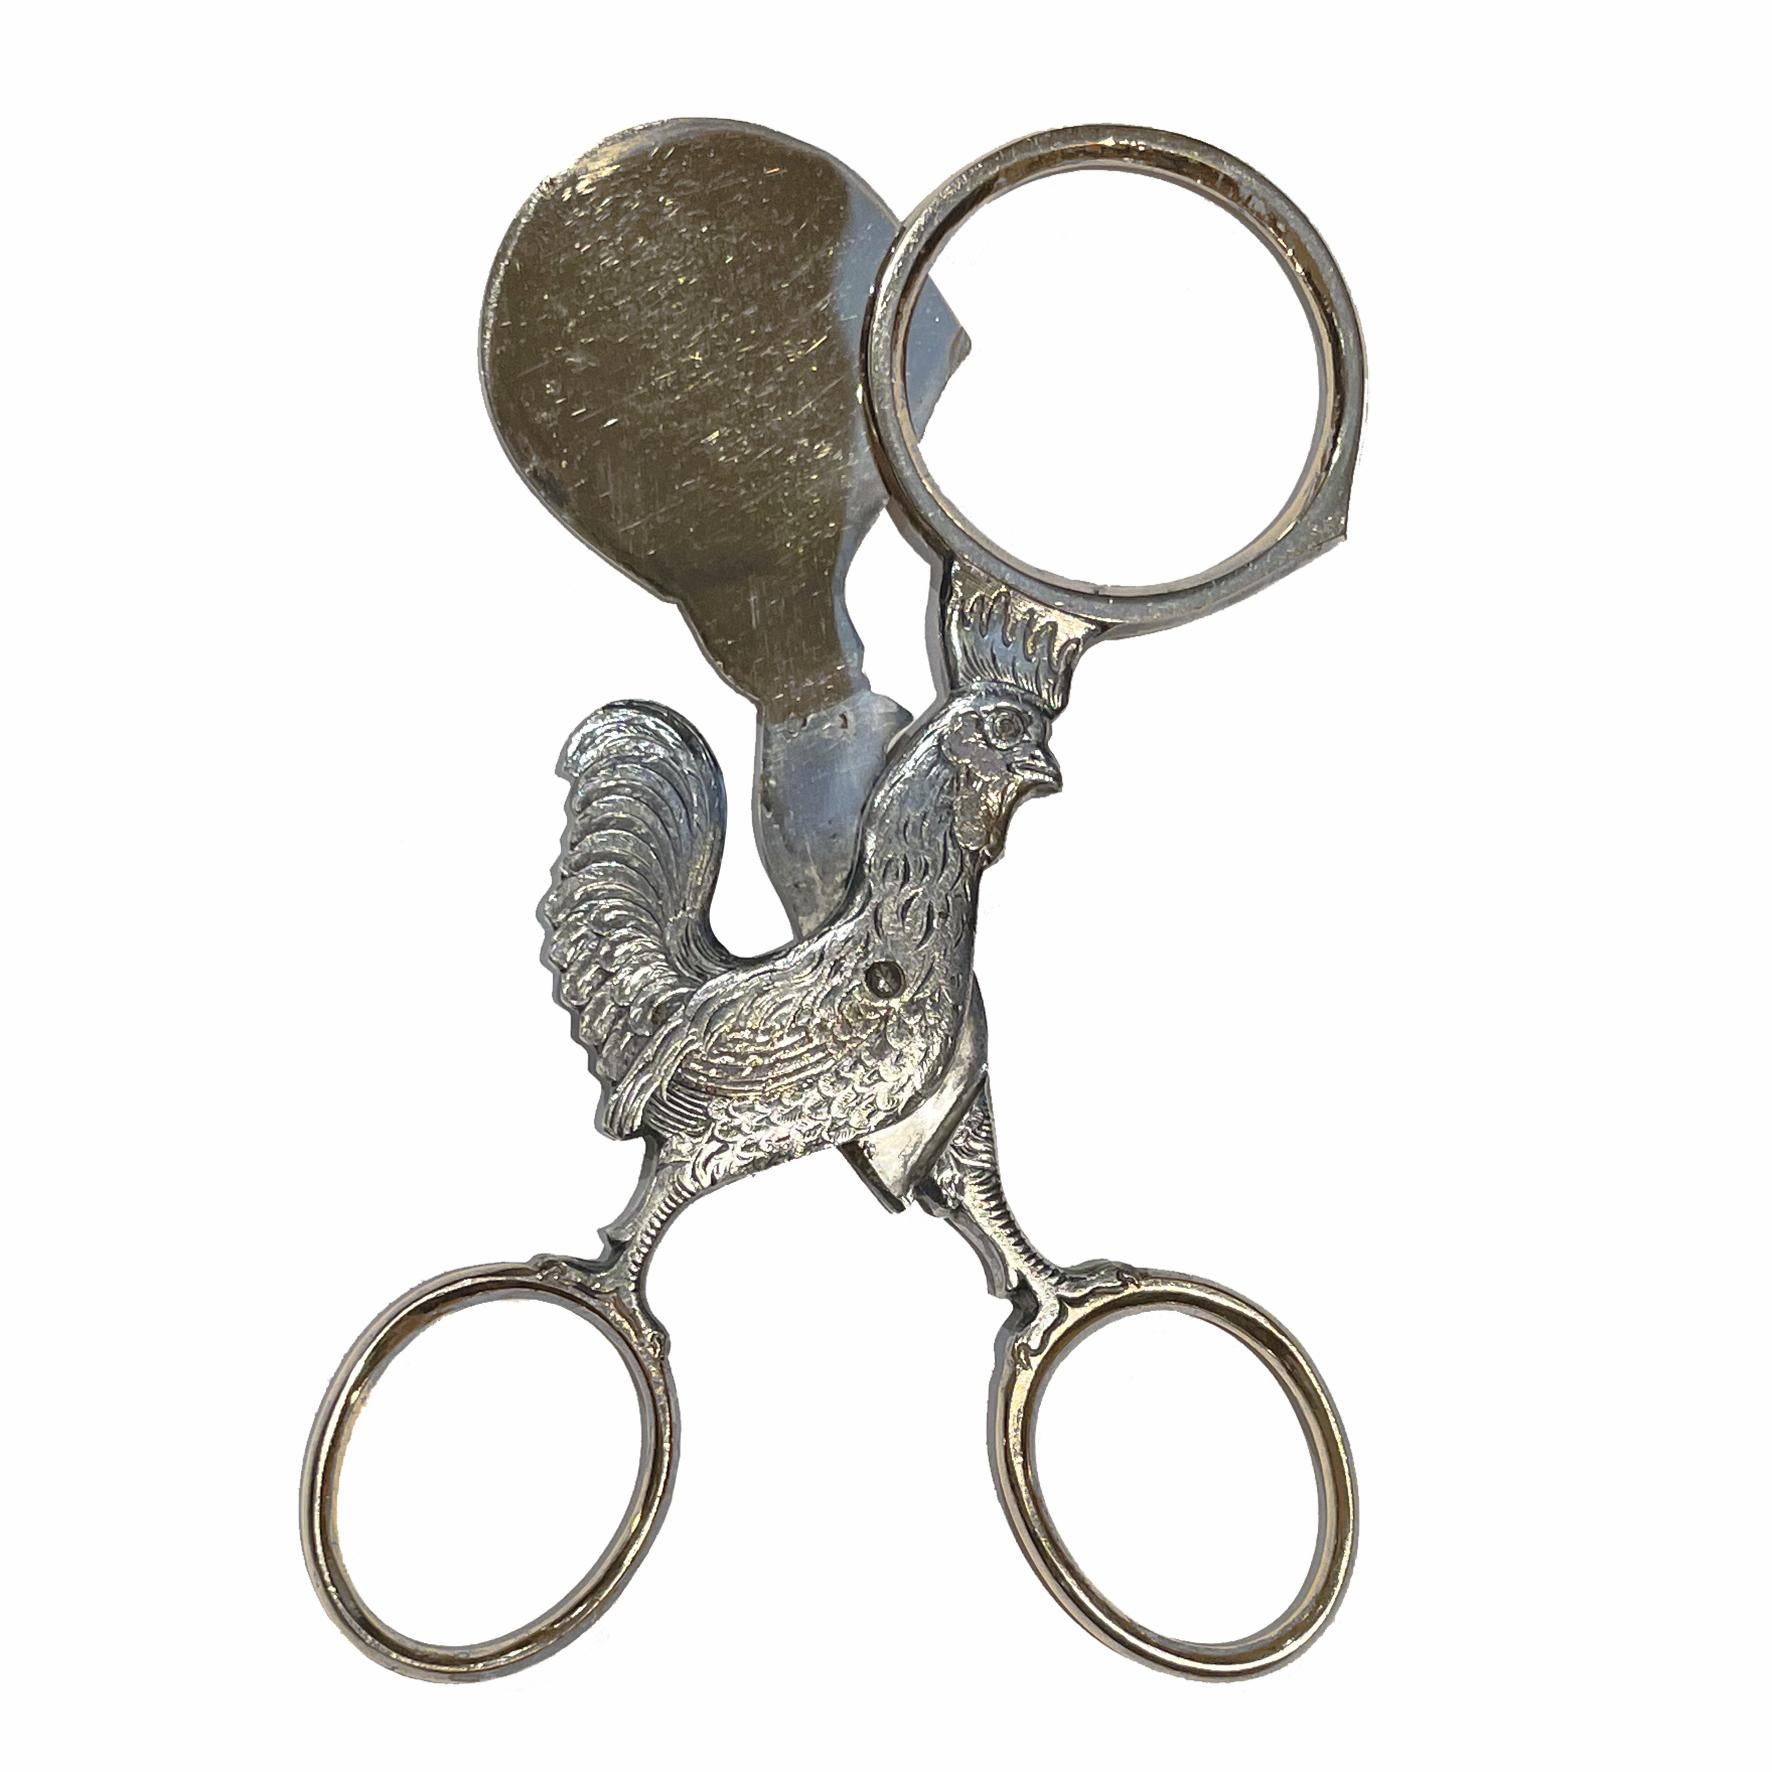 Silver and Gilt silver plate Egg scissors to cut egg shells with great refinement. A wonderful alternative to egg slicers in a very sophisticated shape of a French rooster. Lovely cristal glass red eye.
Item created in the 19th century.